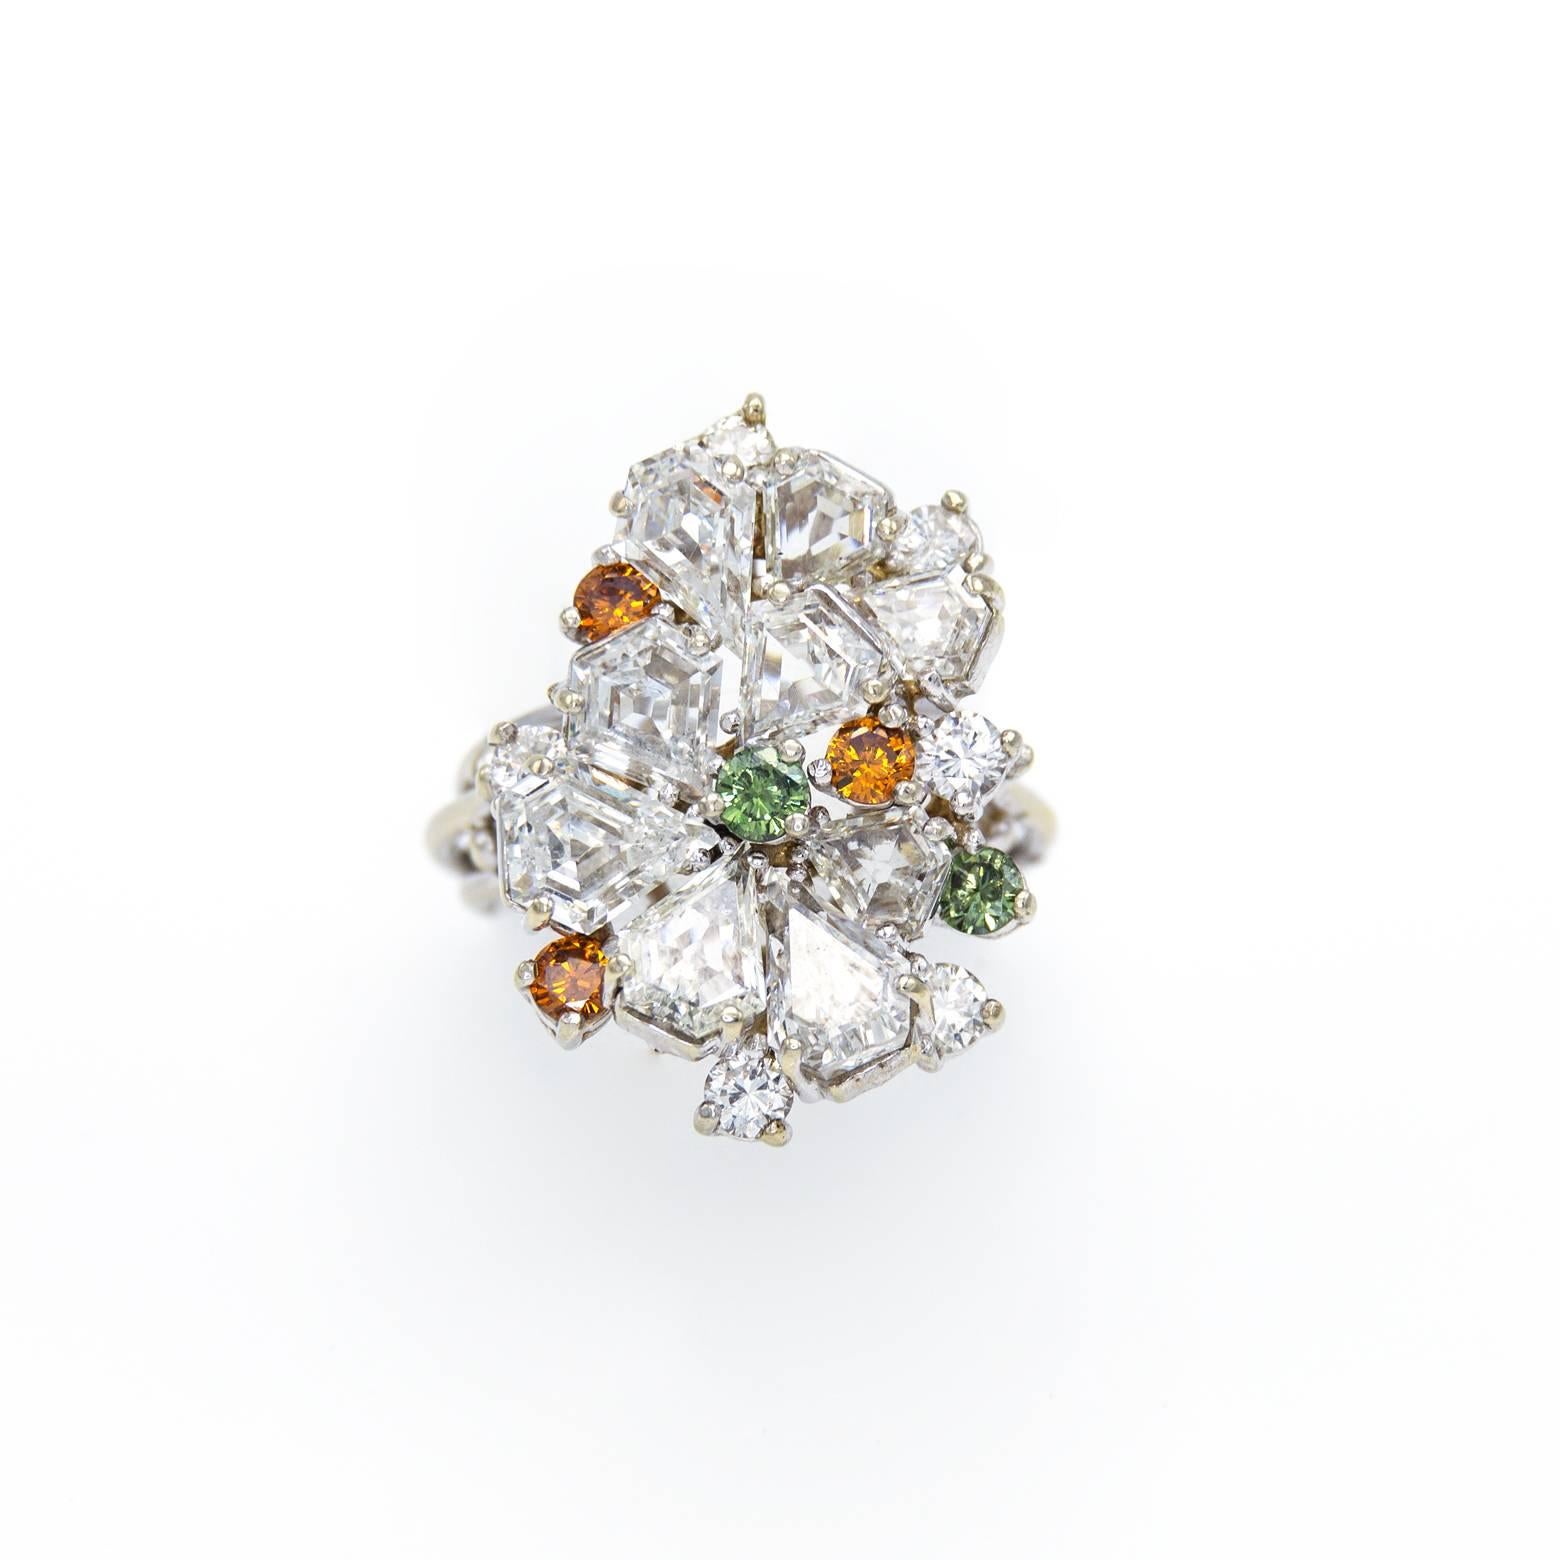 Wow this is a stunner of a ring. It has a multitude of teardrop white diamonds accented with green and yellow diamonds. The white gold setting accentuates the sparkle and clarity of the stones.The total effect is dazzling size 6 1/2. 
The ring size